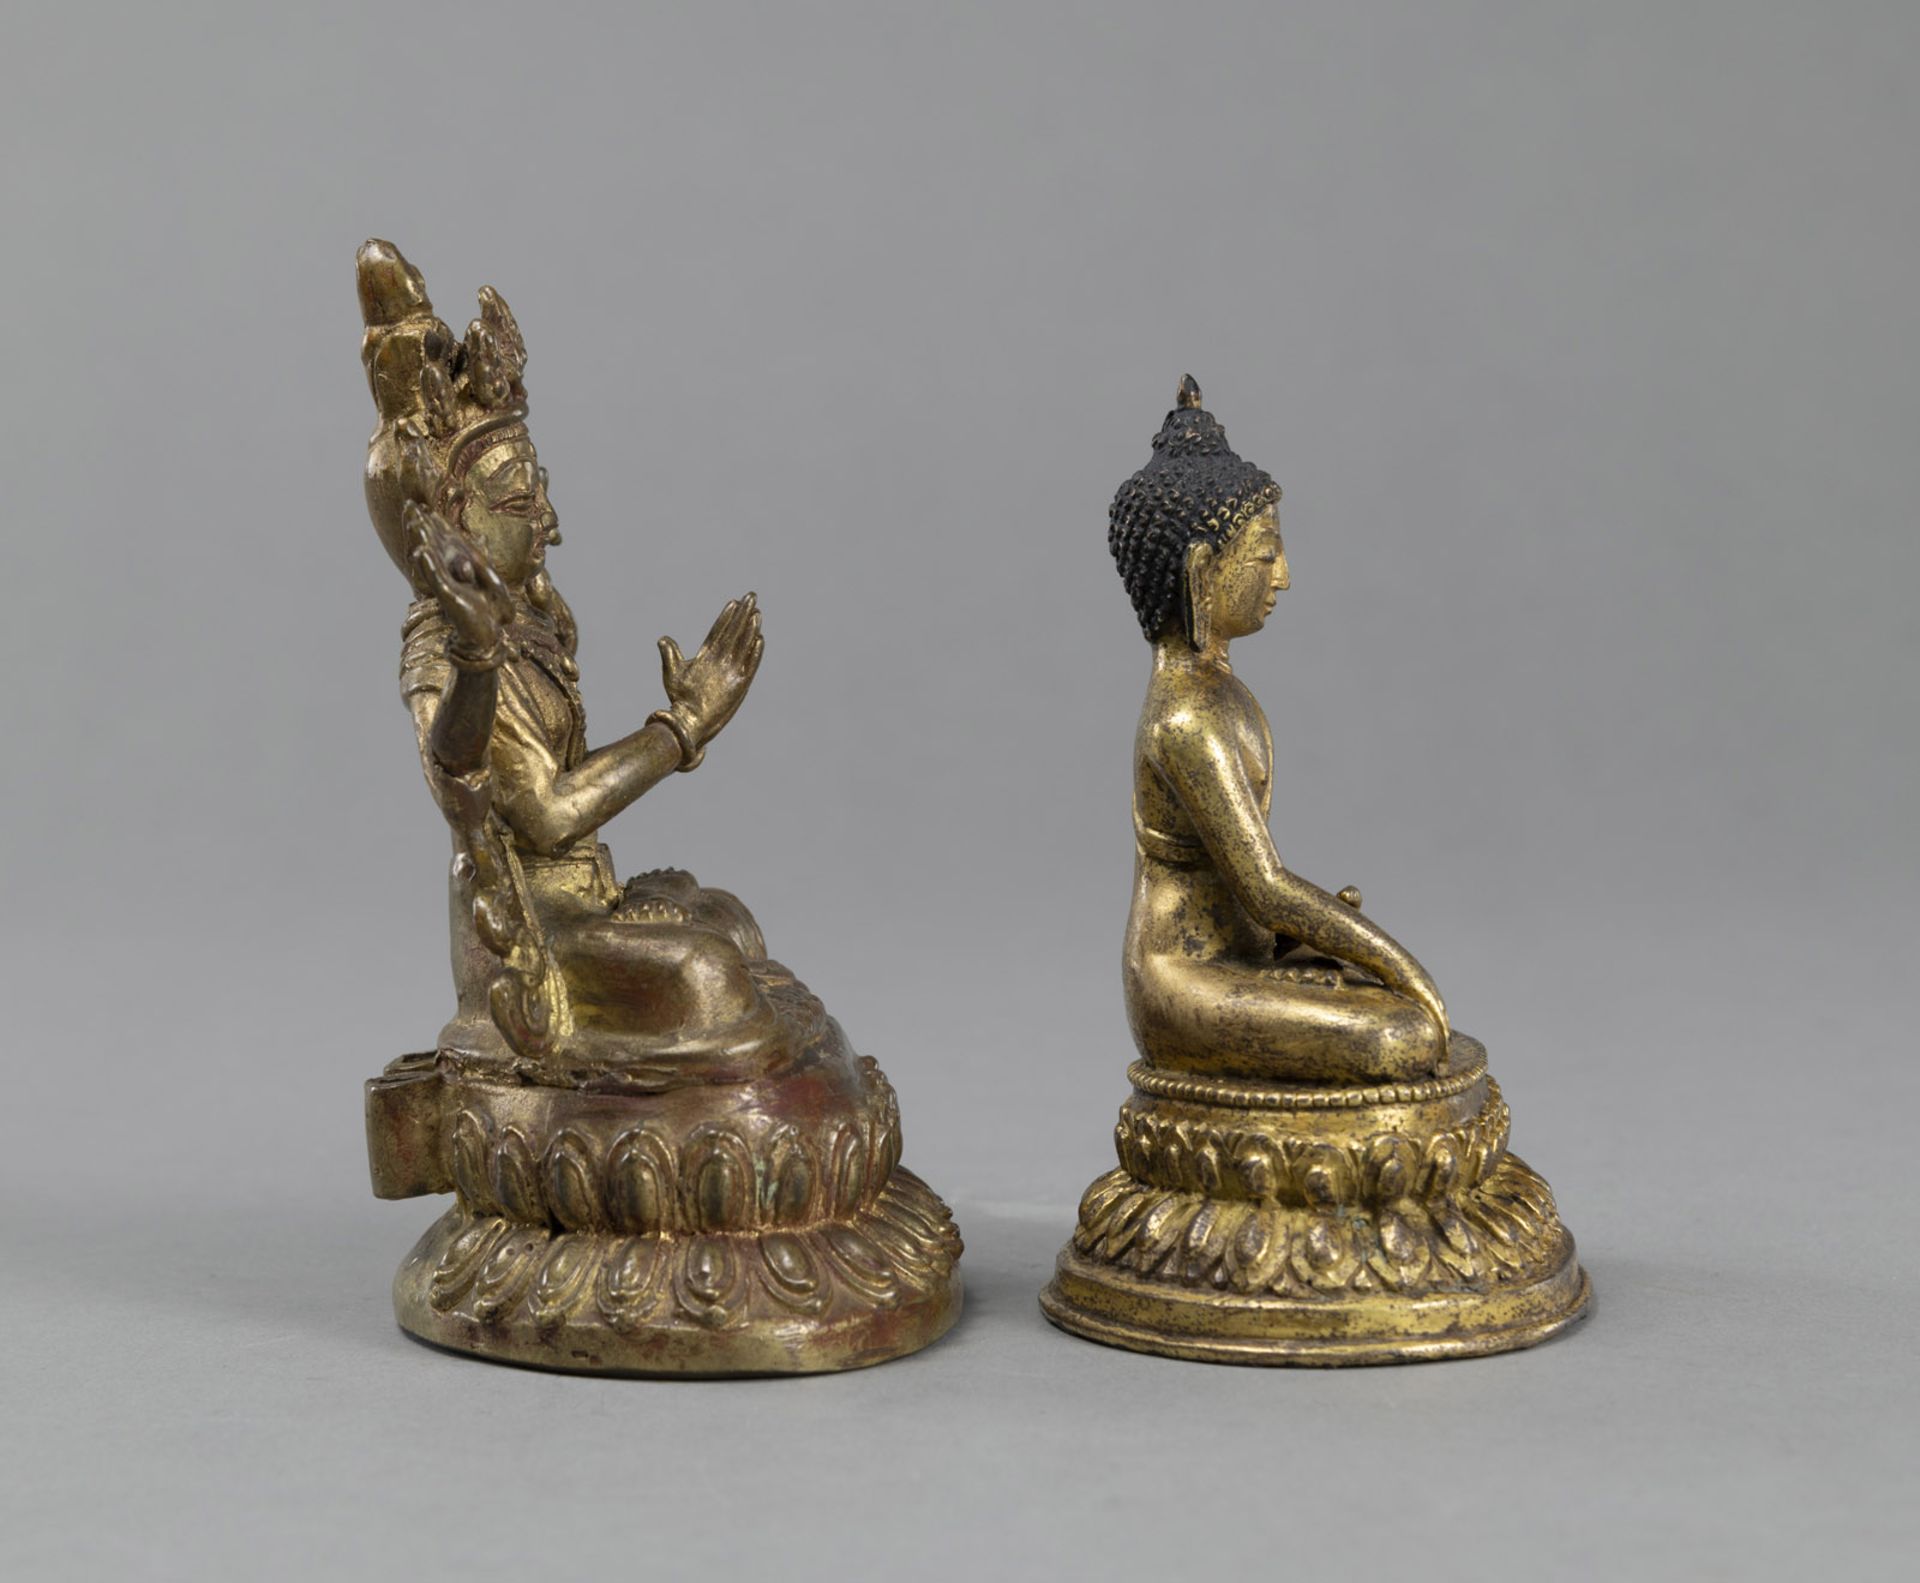 A GILT BRONZE SEATED BUDDHA SHAKYAMUNI AND A LACQUERED AND GILT BRONZE FIGURE OF FOUR-ARMED AVALOKI - Image 2 of 4